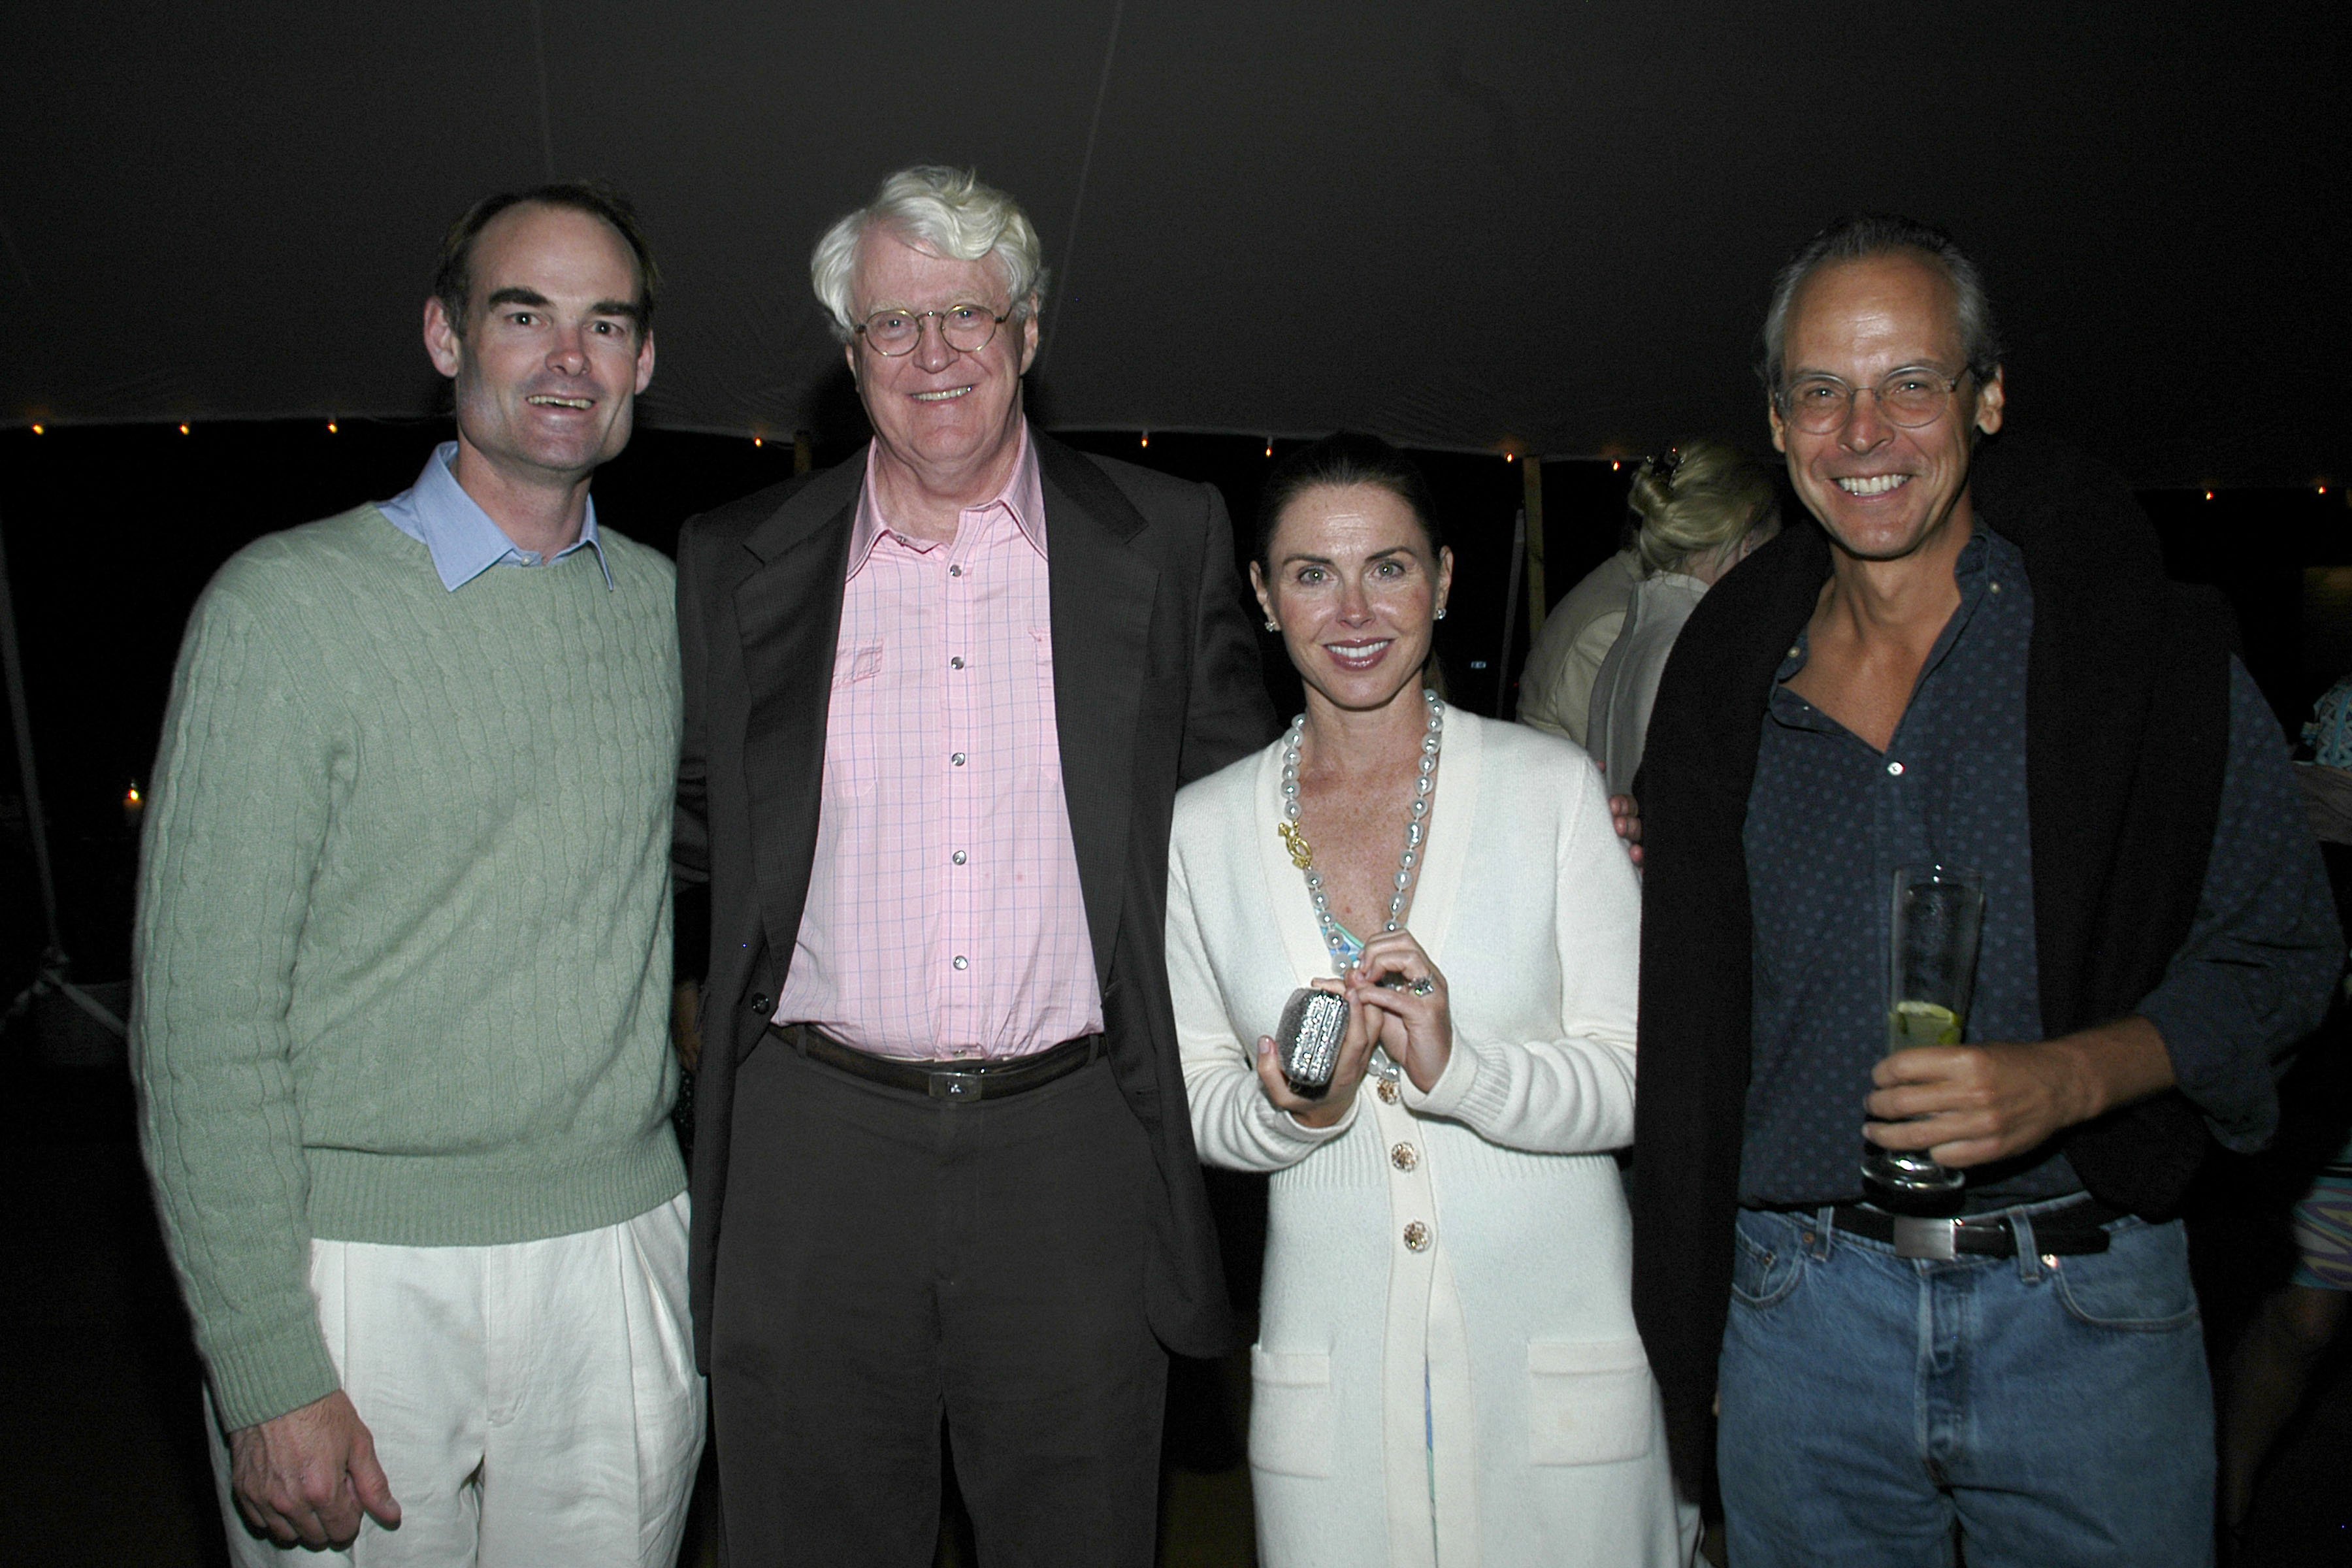 Bill Koch, Bridget Koch and guests attend After Party Dinner For First Look Studios KING OF CALIFORNIA at Home of Suzanne Ircha and Woody Johnson on August 19, 2007, in East Hampton, NY. | Source: Getty Images